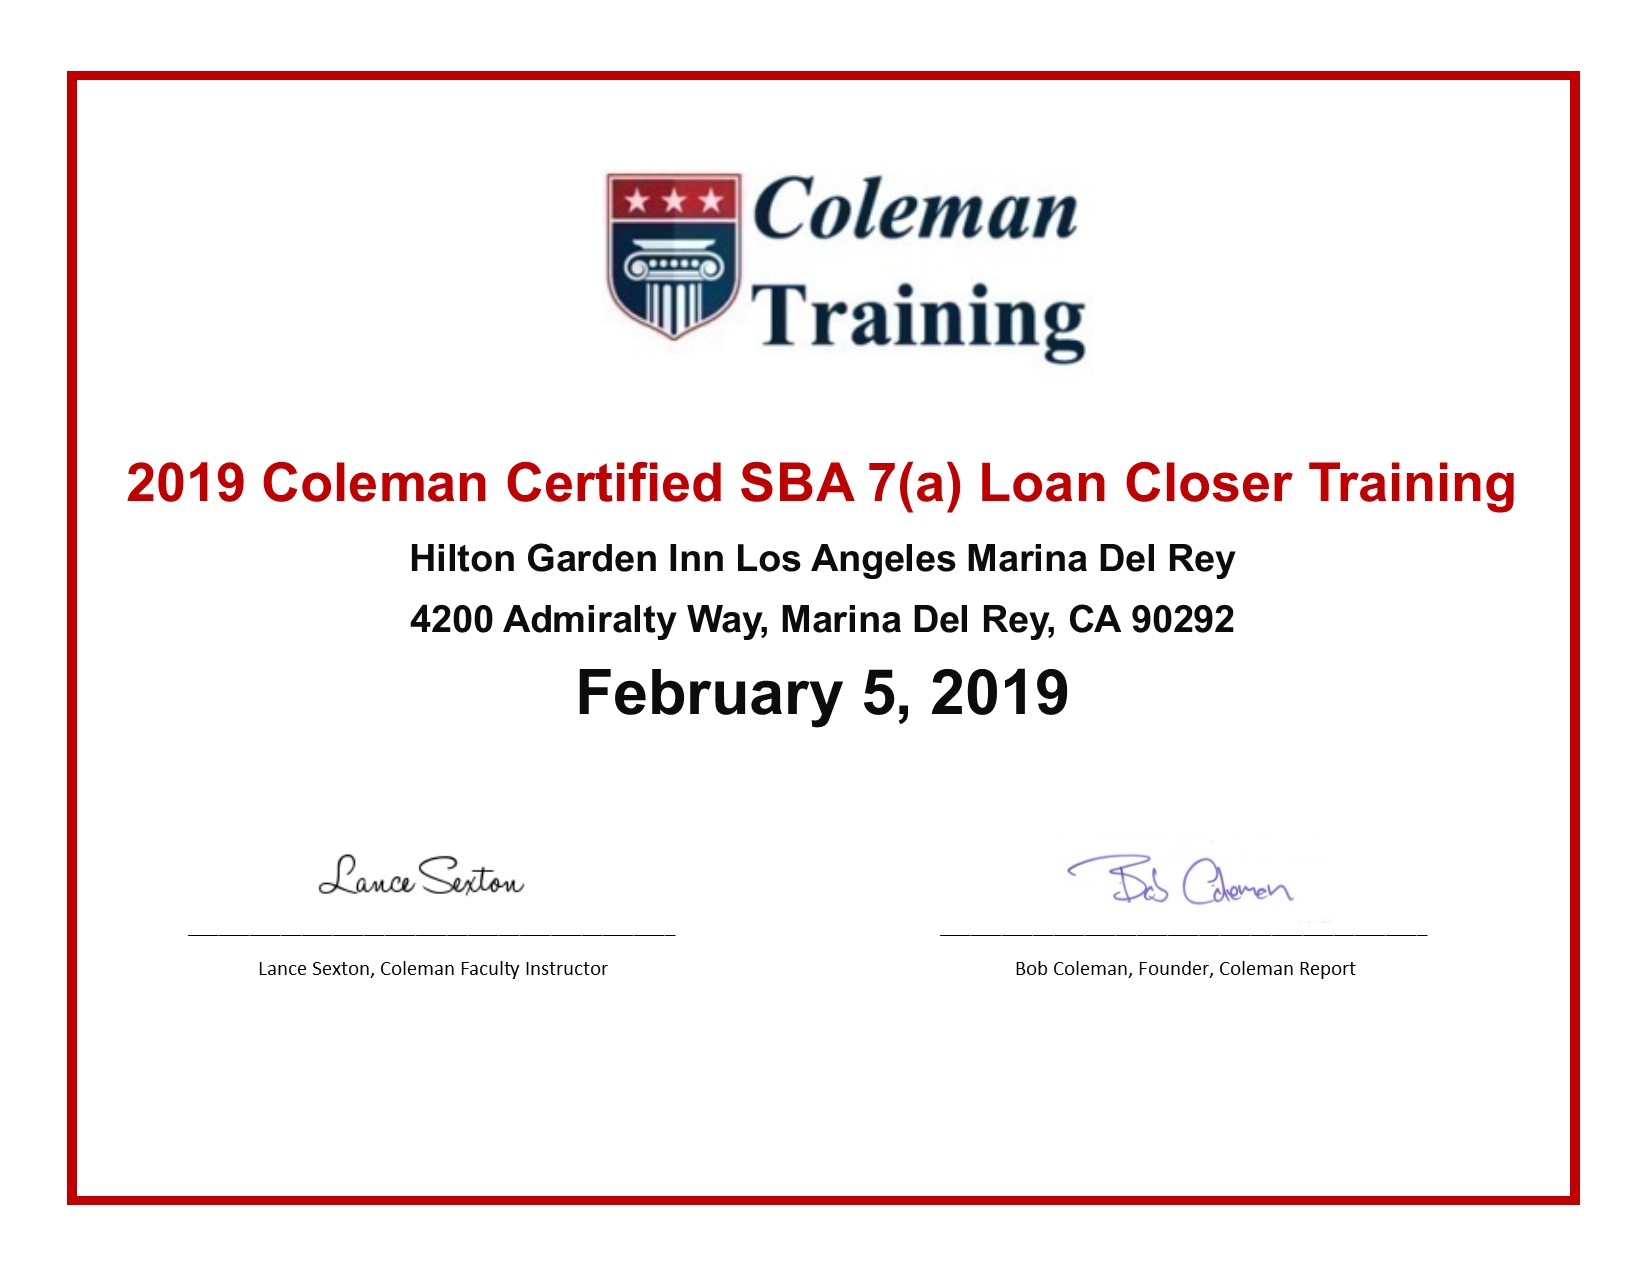 30 Minute Sba Loan Workout for Gym